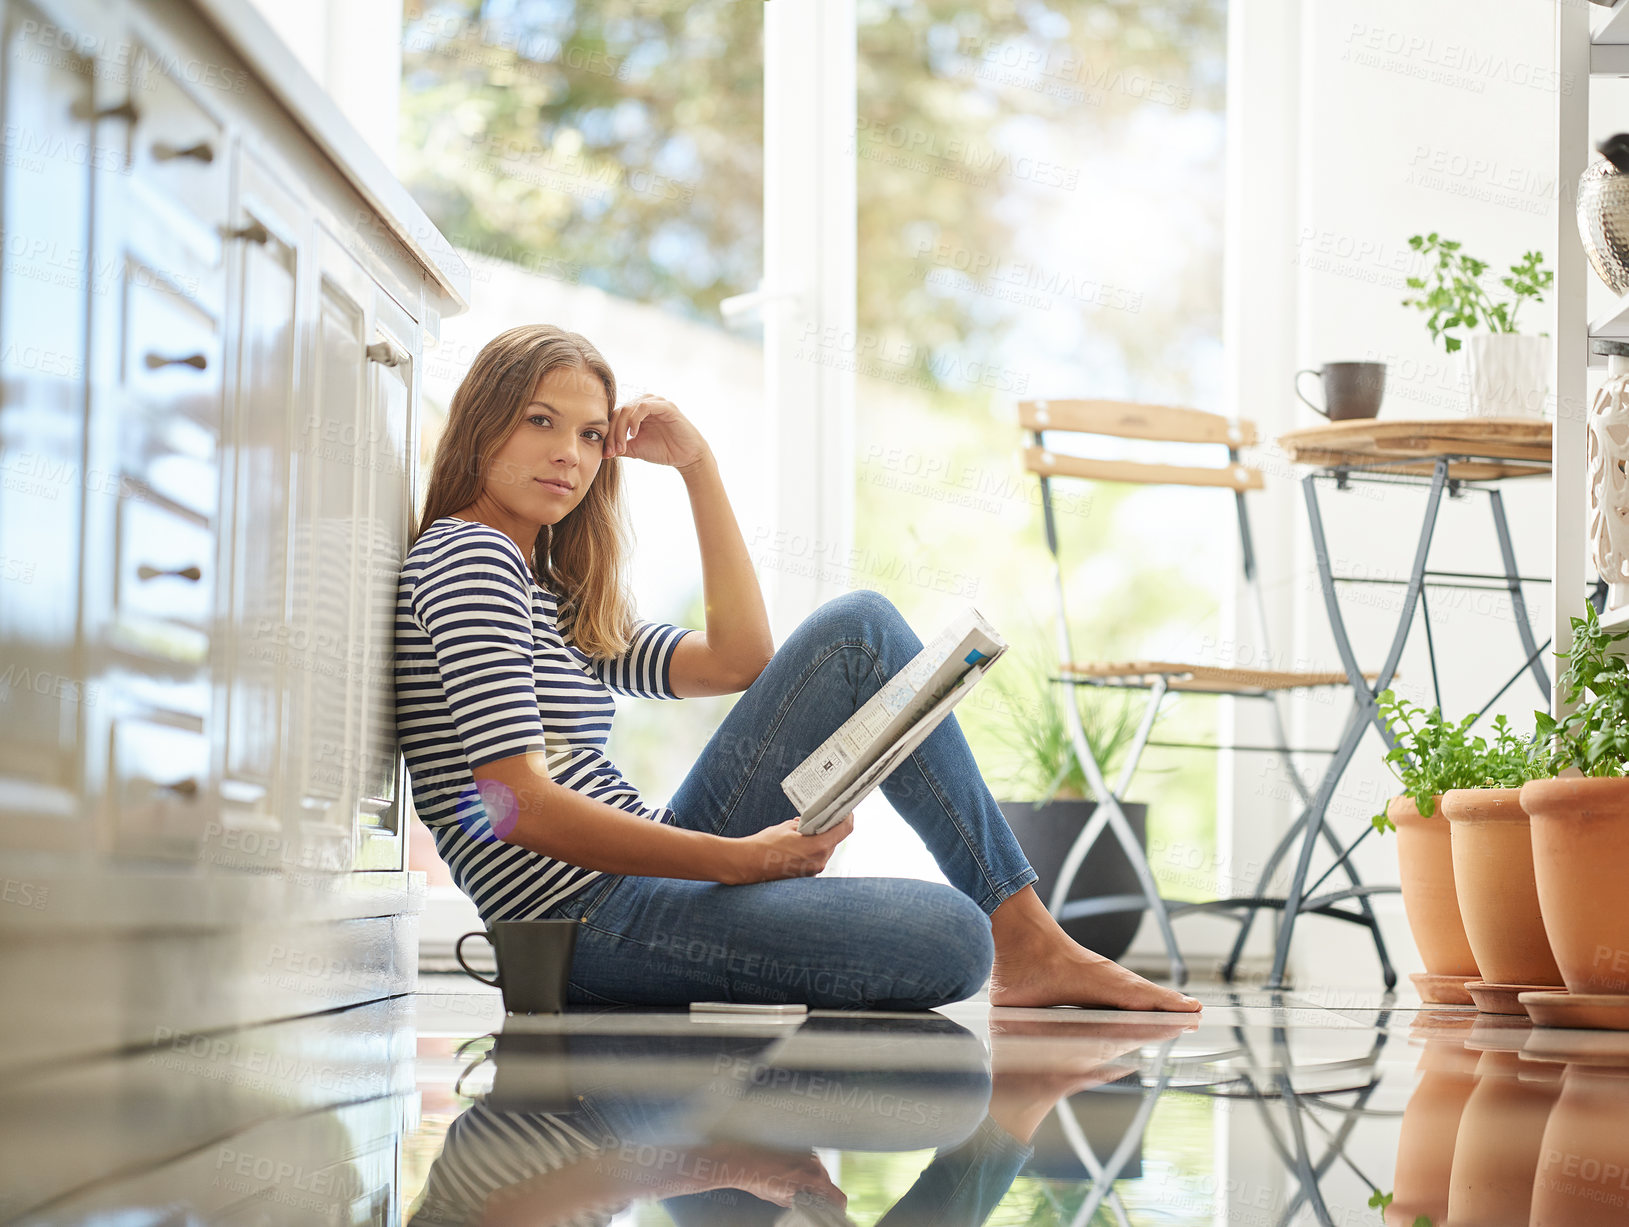 Buy stock photo Portrait of an attractive young woman chilling on her kitchen floor reading a newspaper